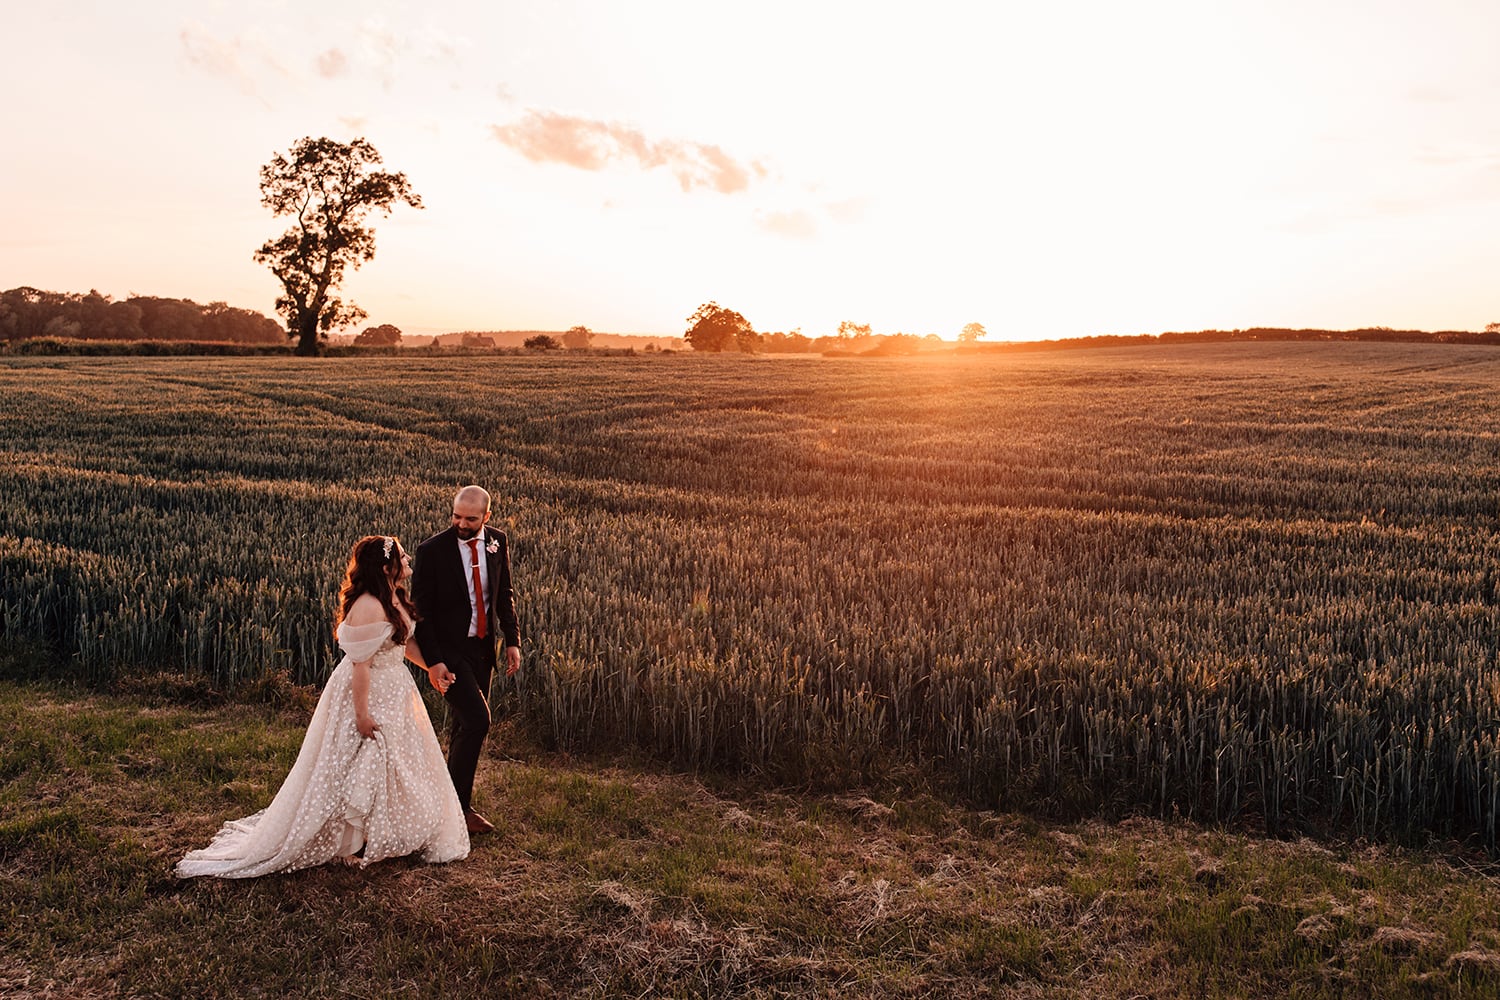 Landscape photograph of the sunset with Bride and Groom walking into the distance